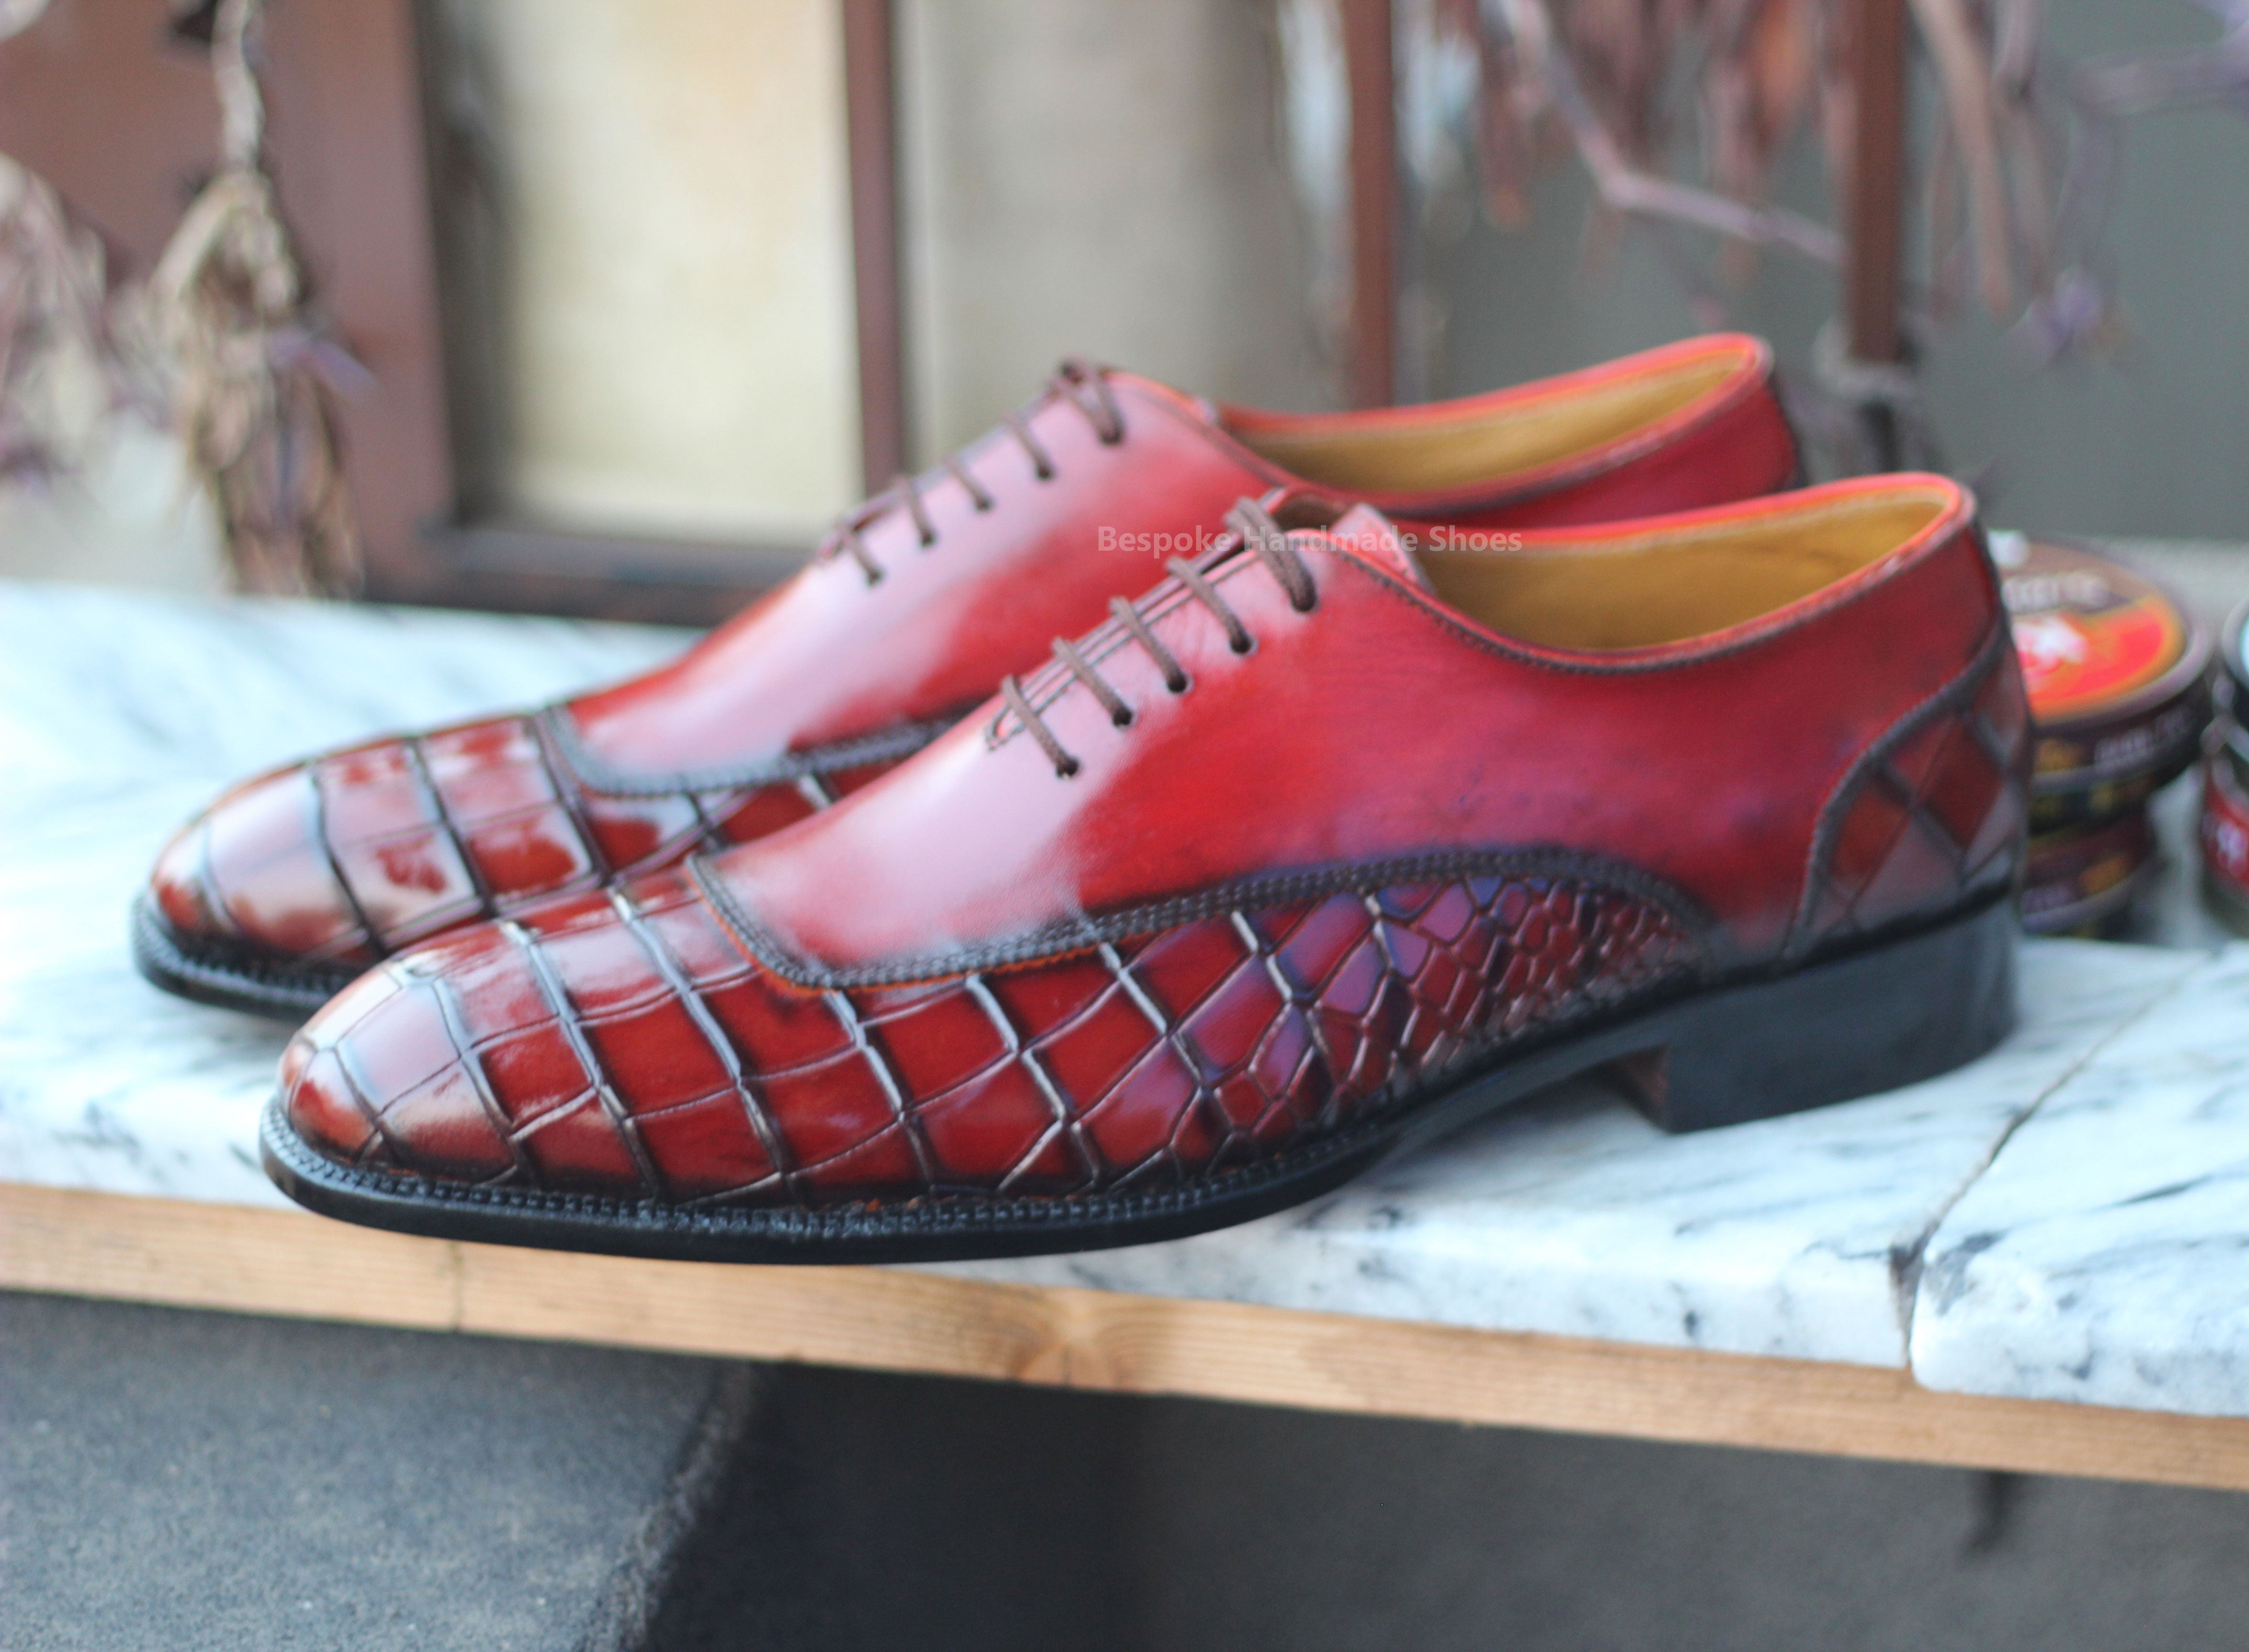 Custom Made Men's New Handmade Red Crocodile Leather Oxford Lace Up Dress Shoes